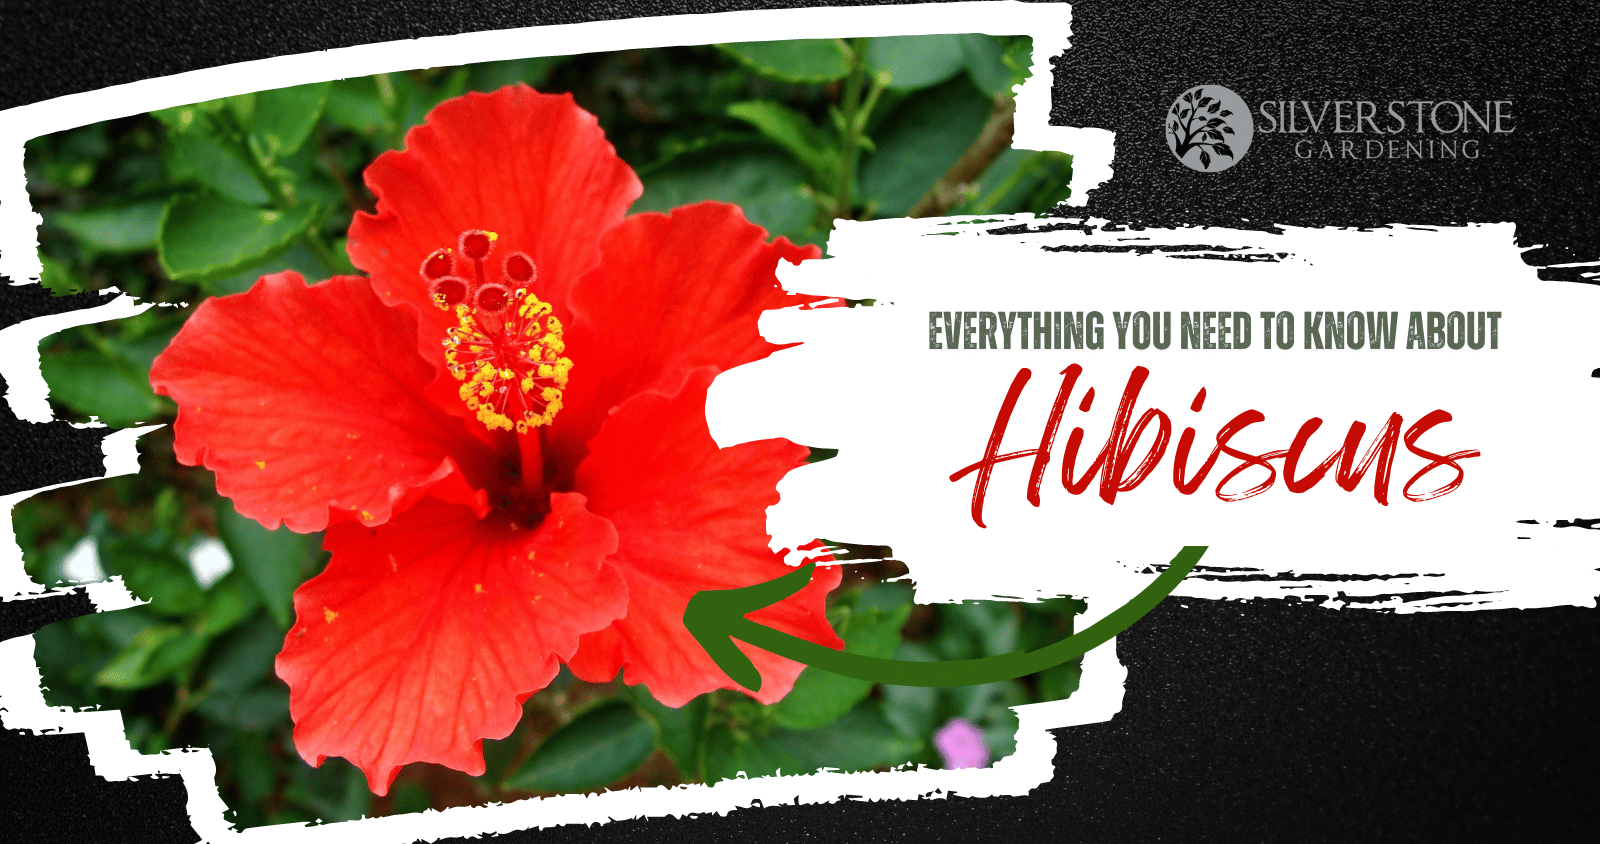 Chinese hibiscus, Description, Flower, Uses, Cultivation, & Facts